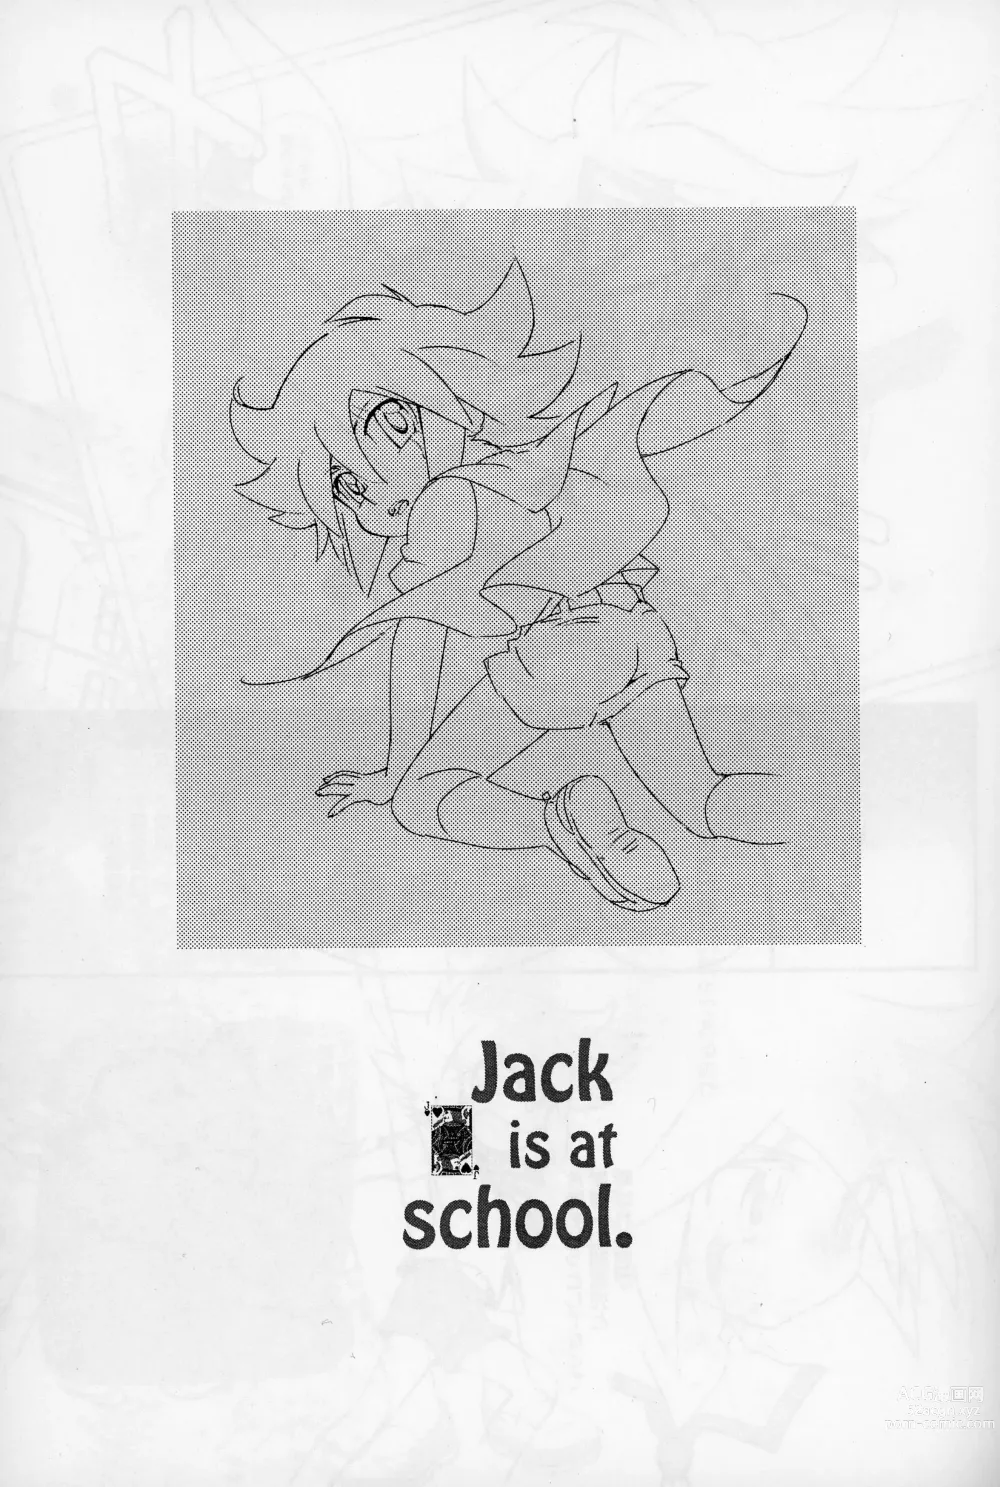 Page 2 of doujinshi Jack is at school.